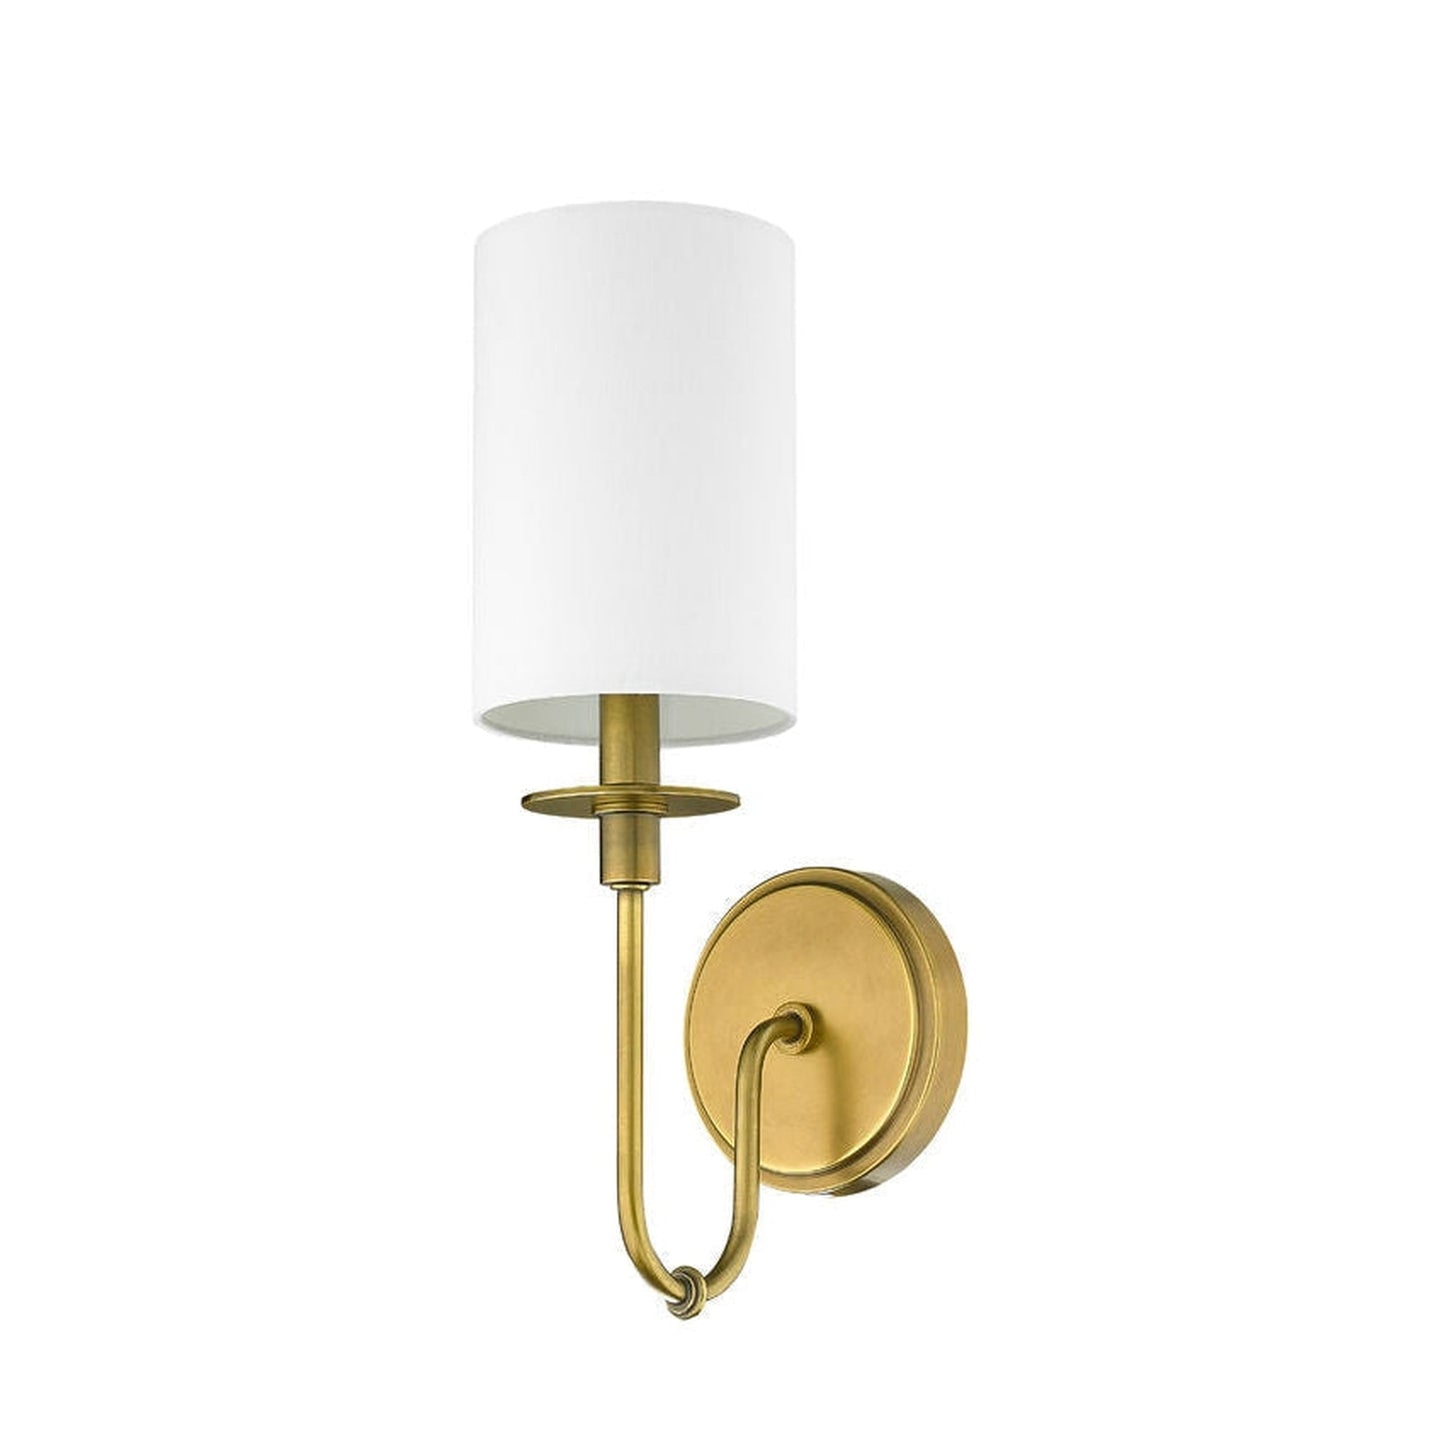 Z-Lite Ella 5" 1-Light White Rubbed Brass Wall Sconce With White Fabric Shade